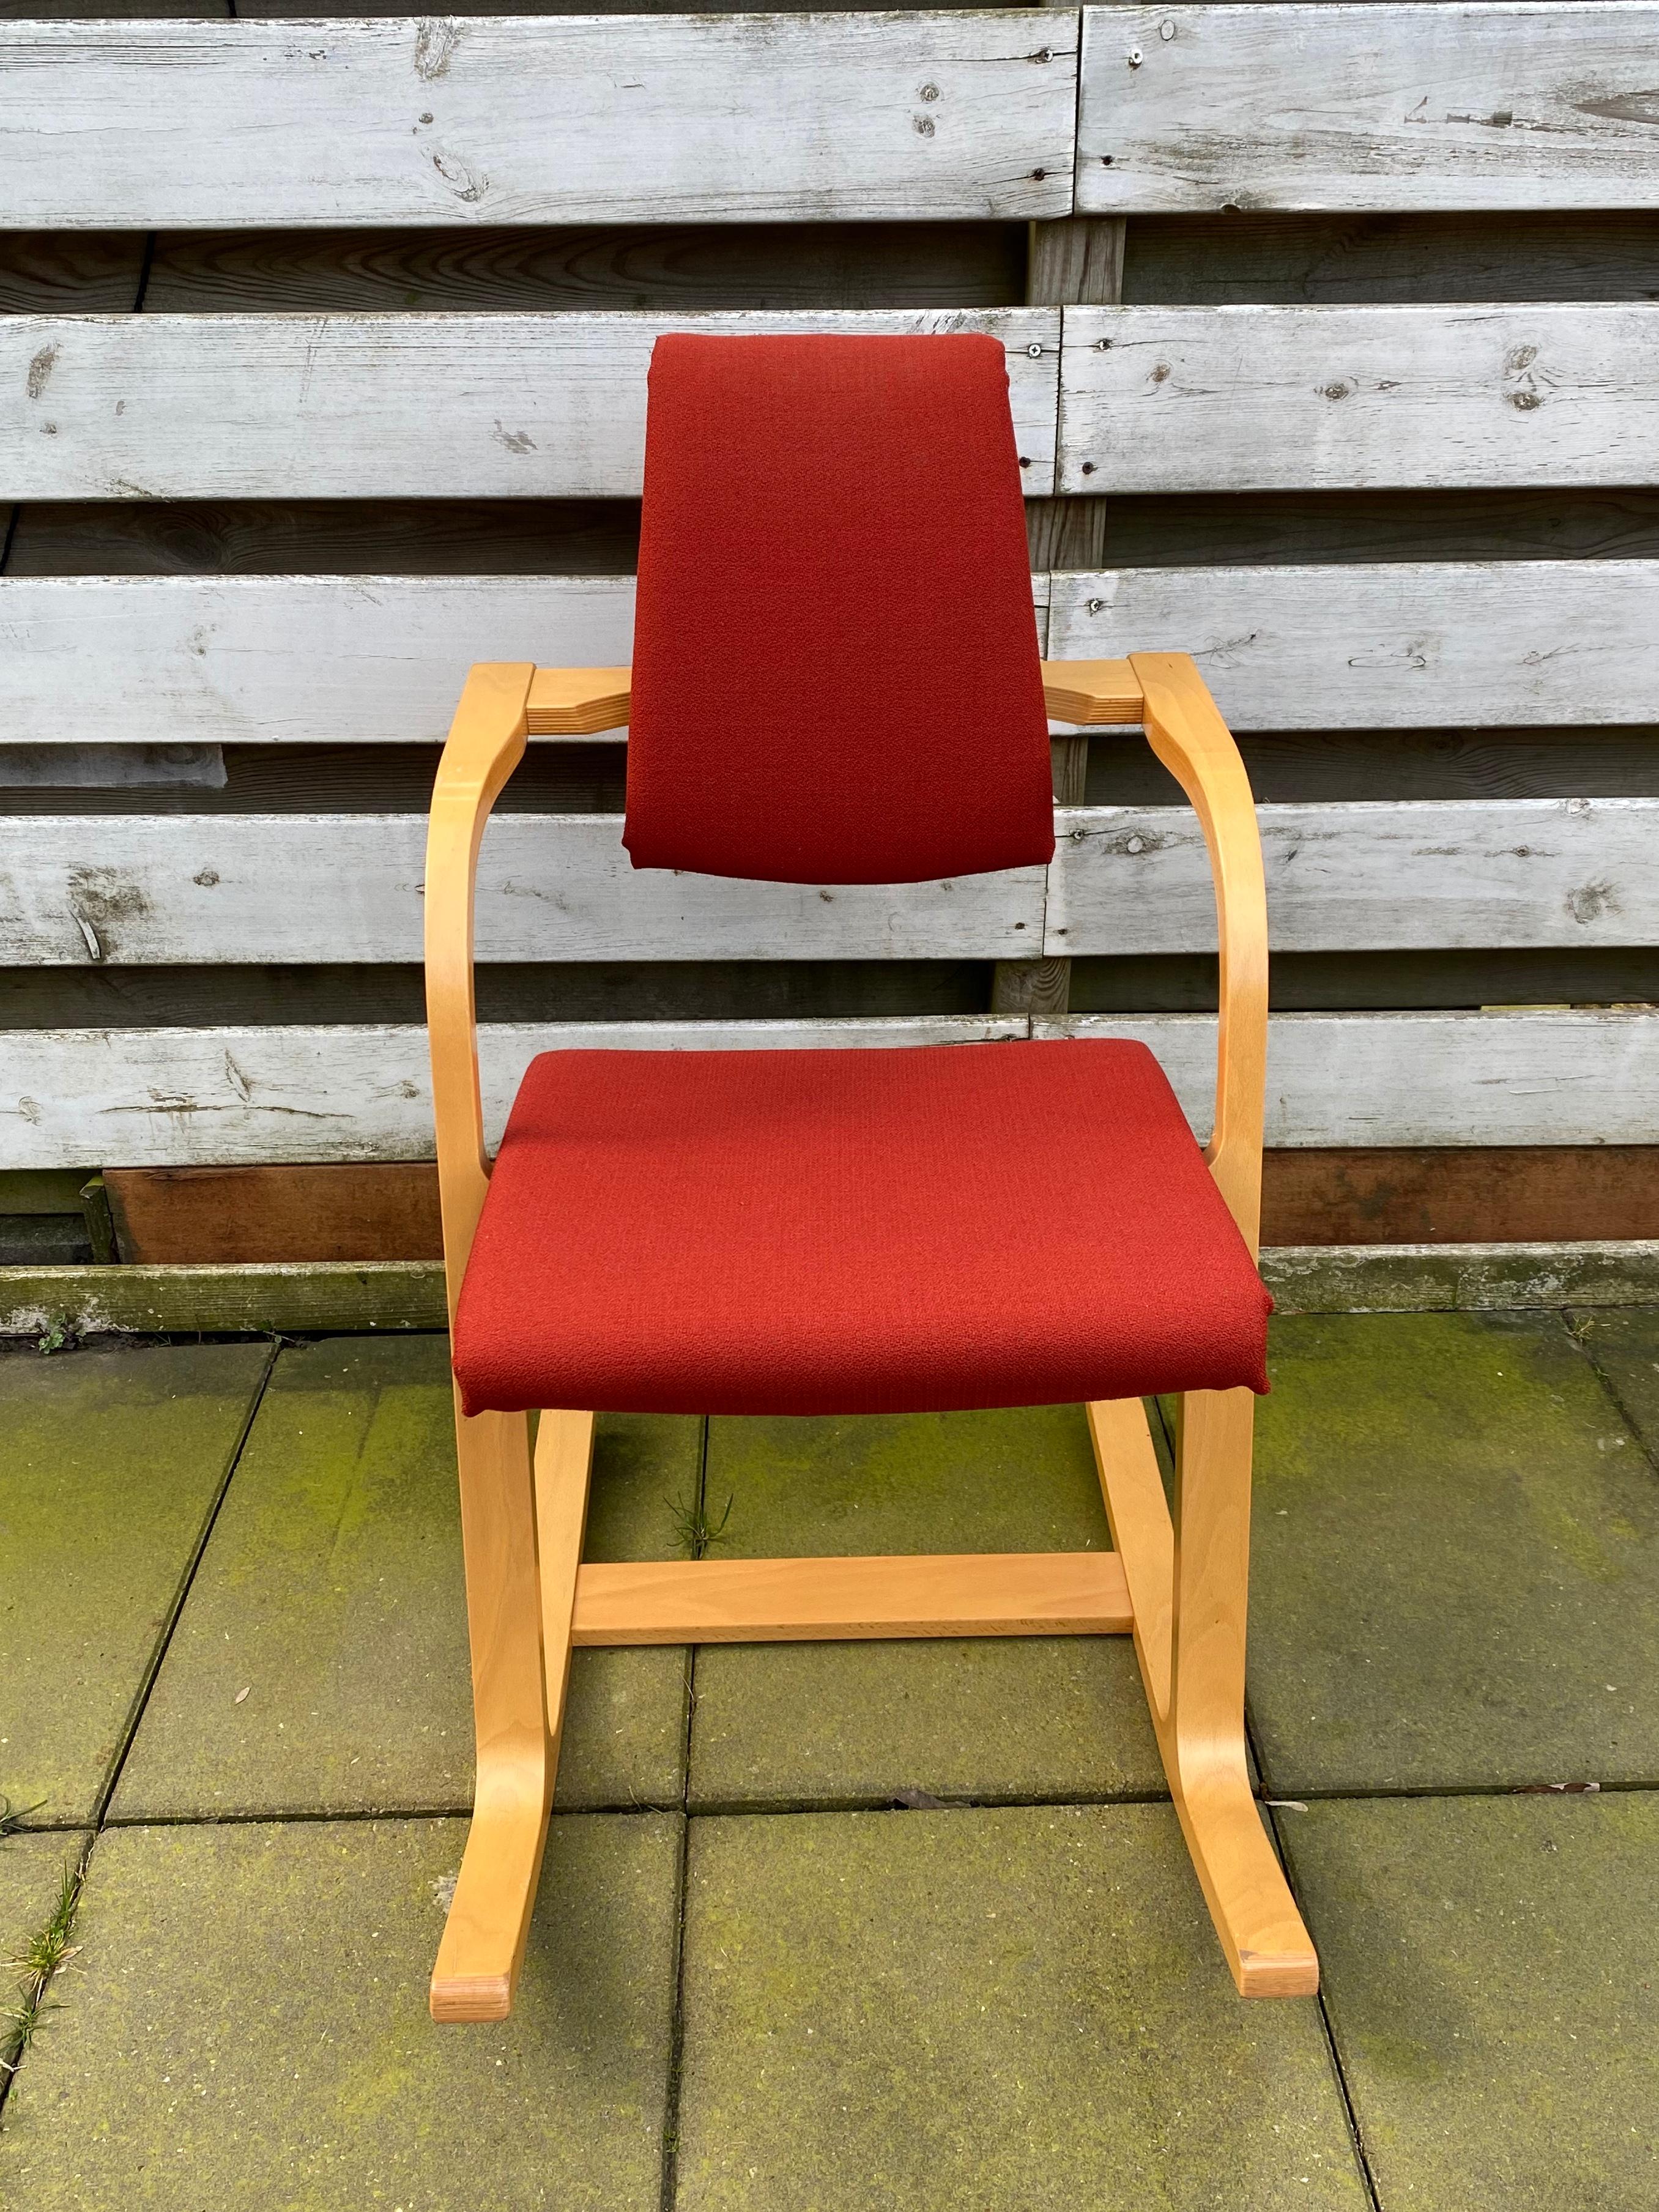 Contemporary Stokke Varier Actulum, Balance Chairs, Dinner Chairs, Rocking Chairs